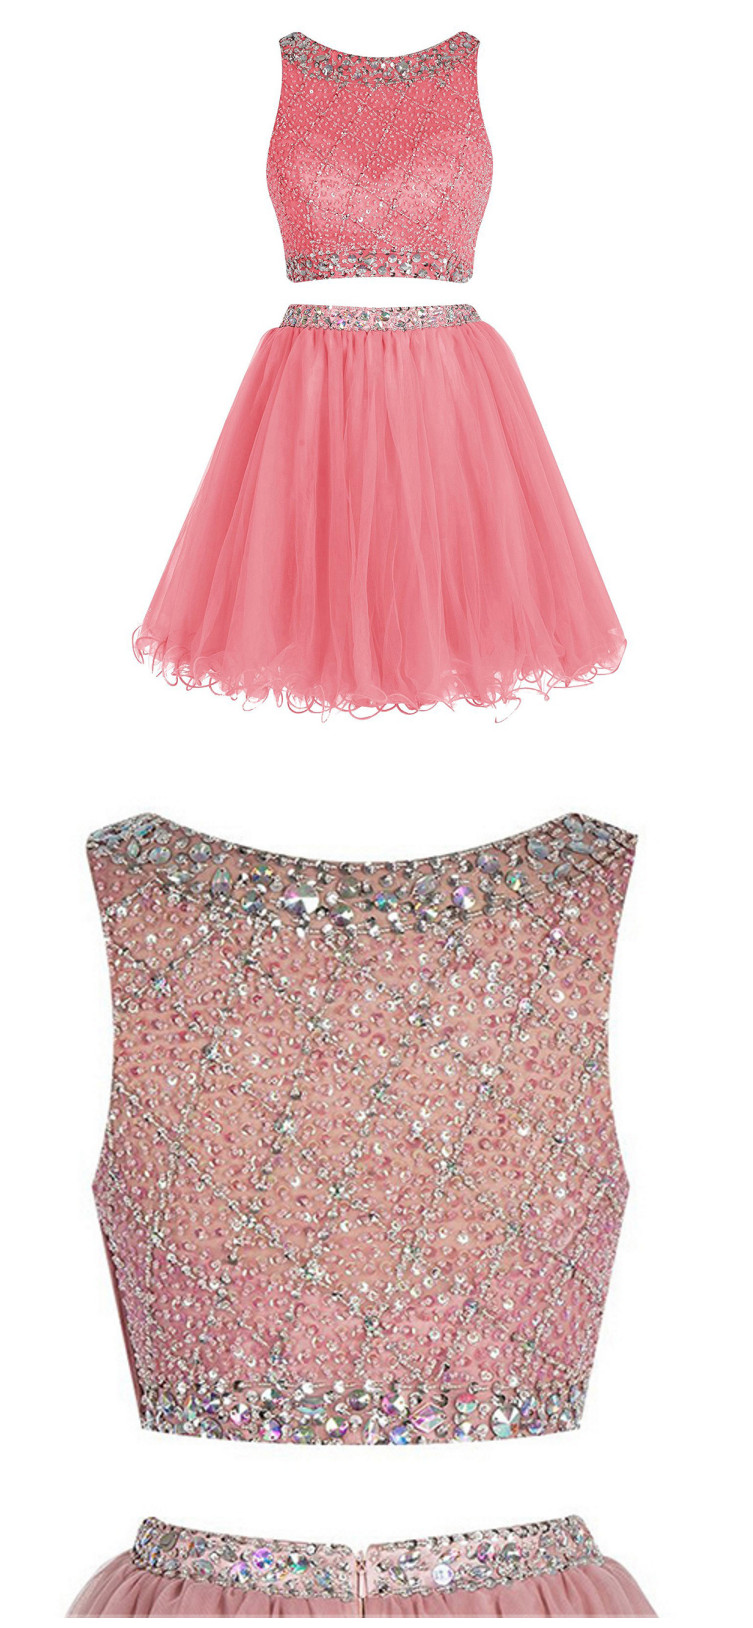 Bateau Neck Illusion Pink Short Prom Dress, Crystal Beaded Two Piece Prom Dress, Sequined Crop Top Tulle Mini Prom Dress